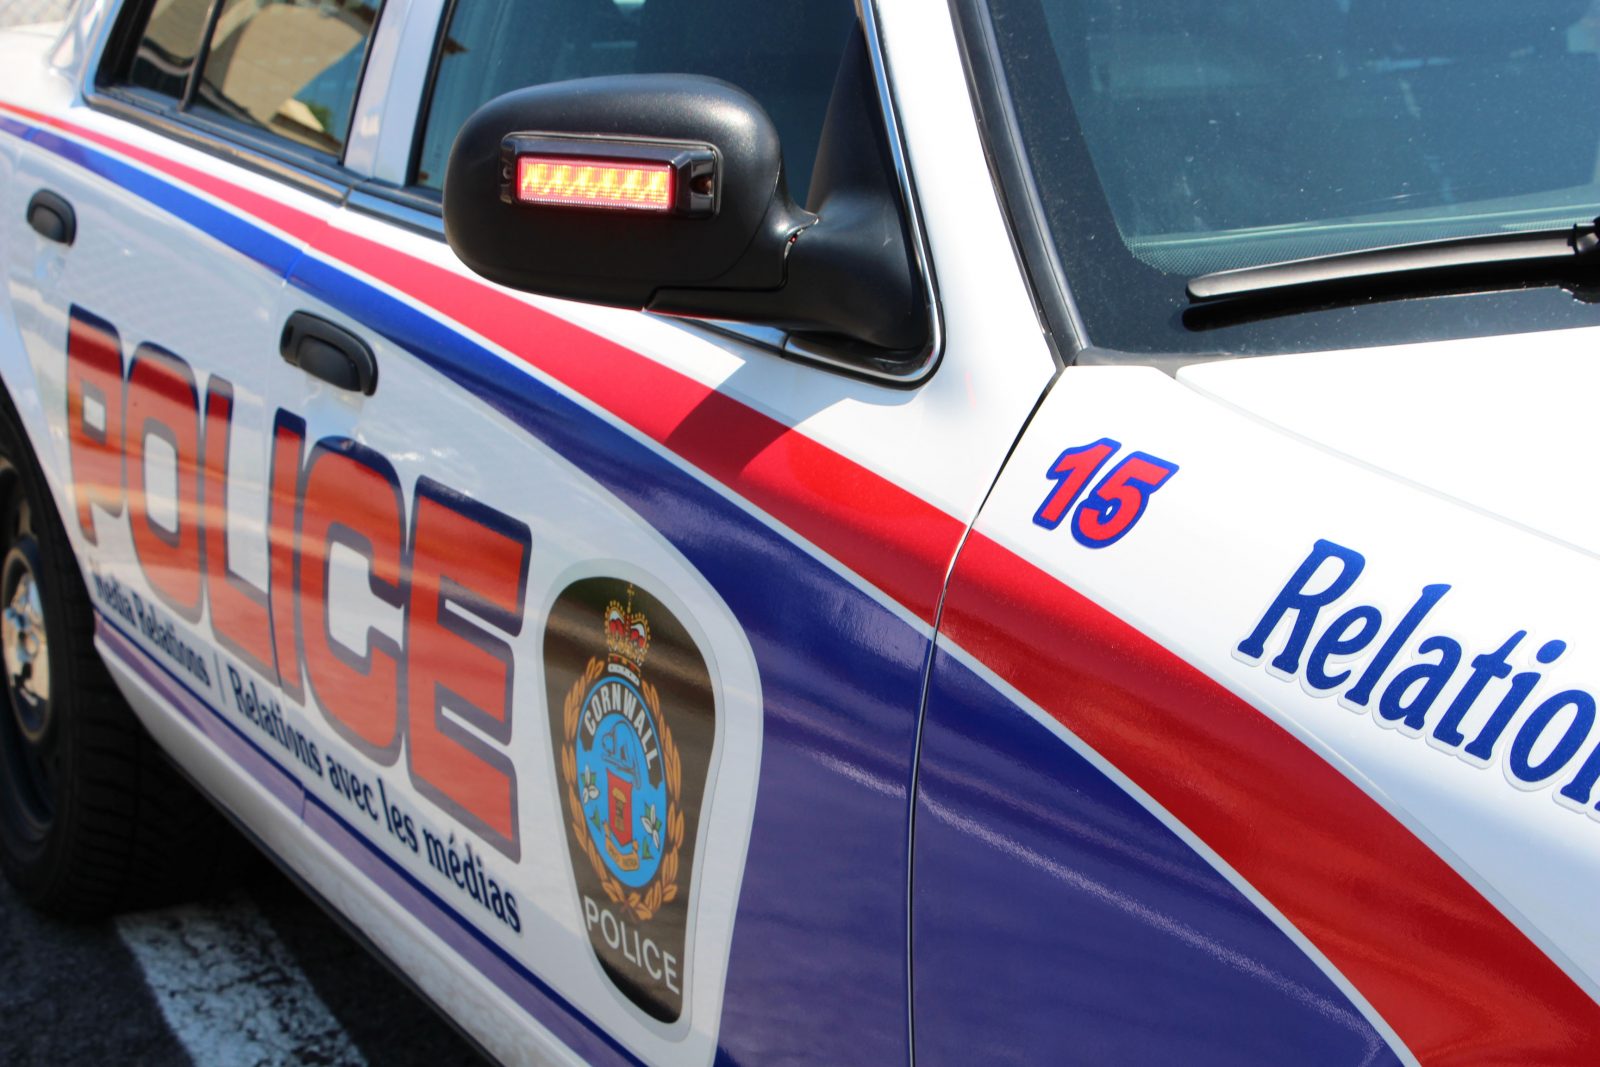 Cornwall teen charged with sexual assault